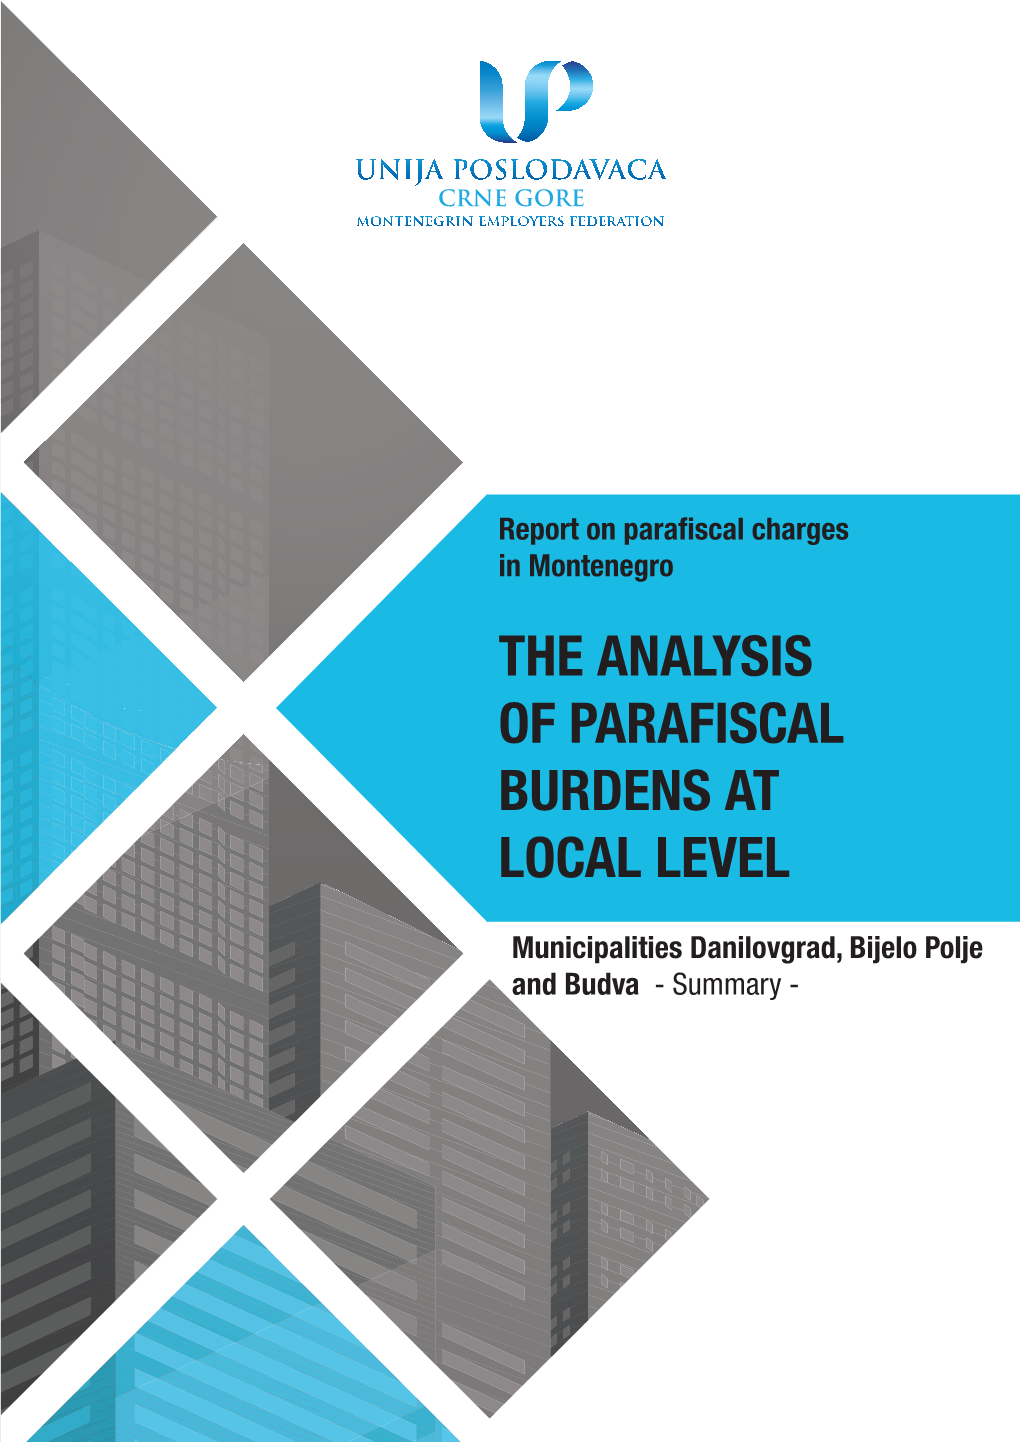 The Analysis of Parafiscal Burdens at Local Level